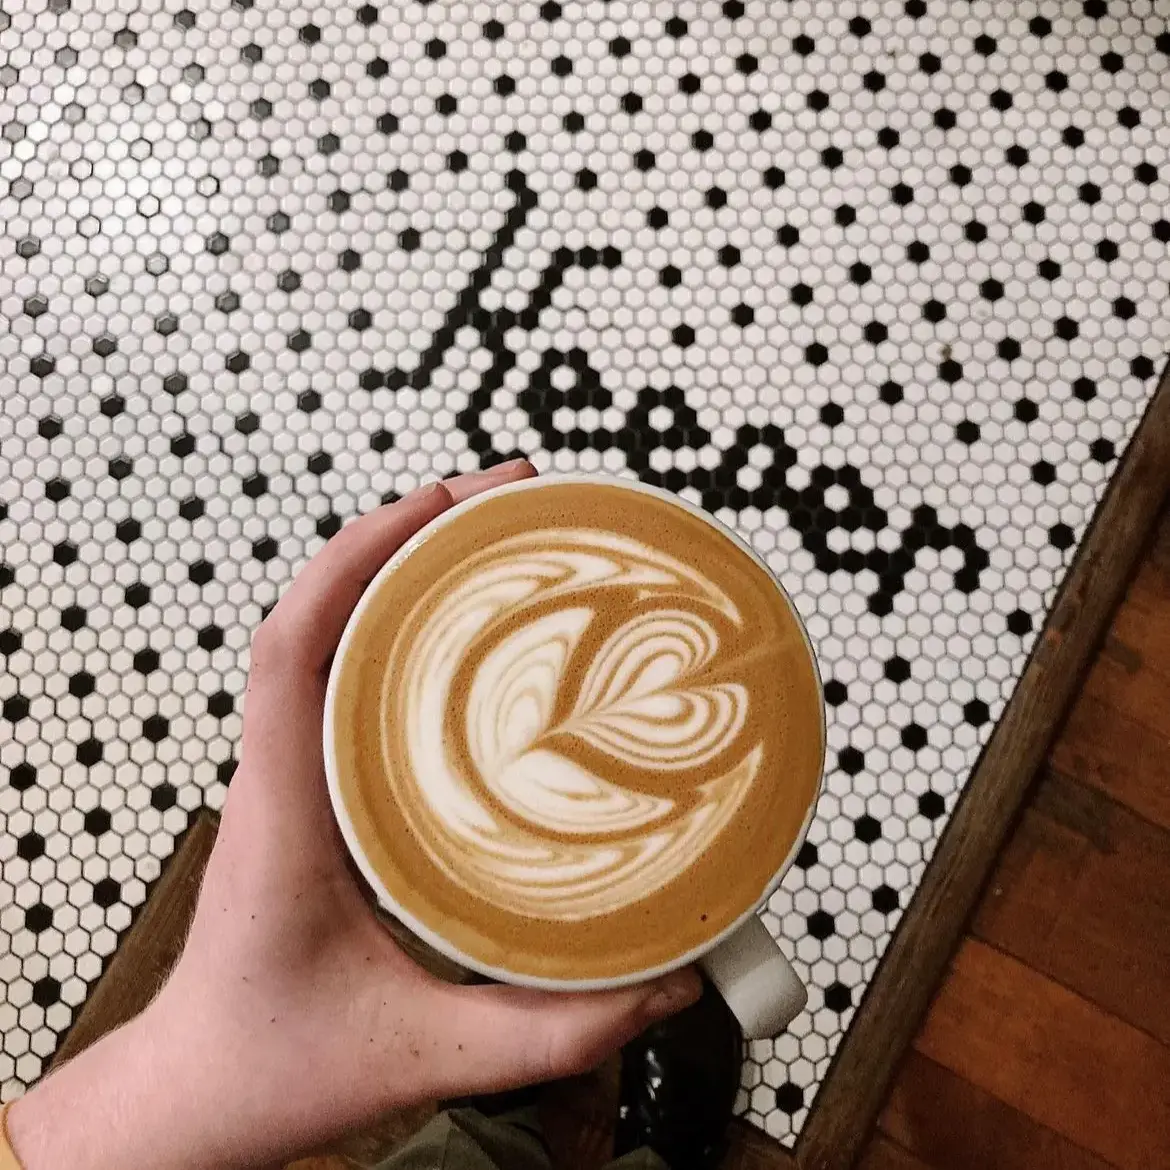 A hand holds a mug with a latte featuring a rosetta. The countertop underneath is covered in tiny hexagon tiles, spelling out Keeper in tile right above the drink in the photo.